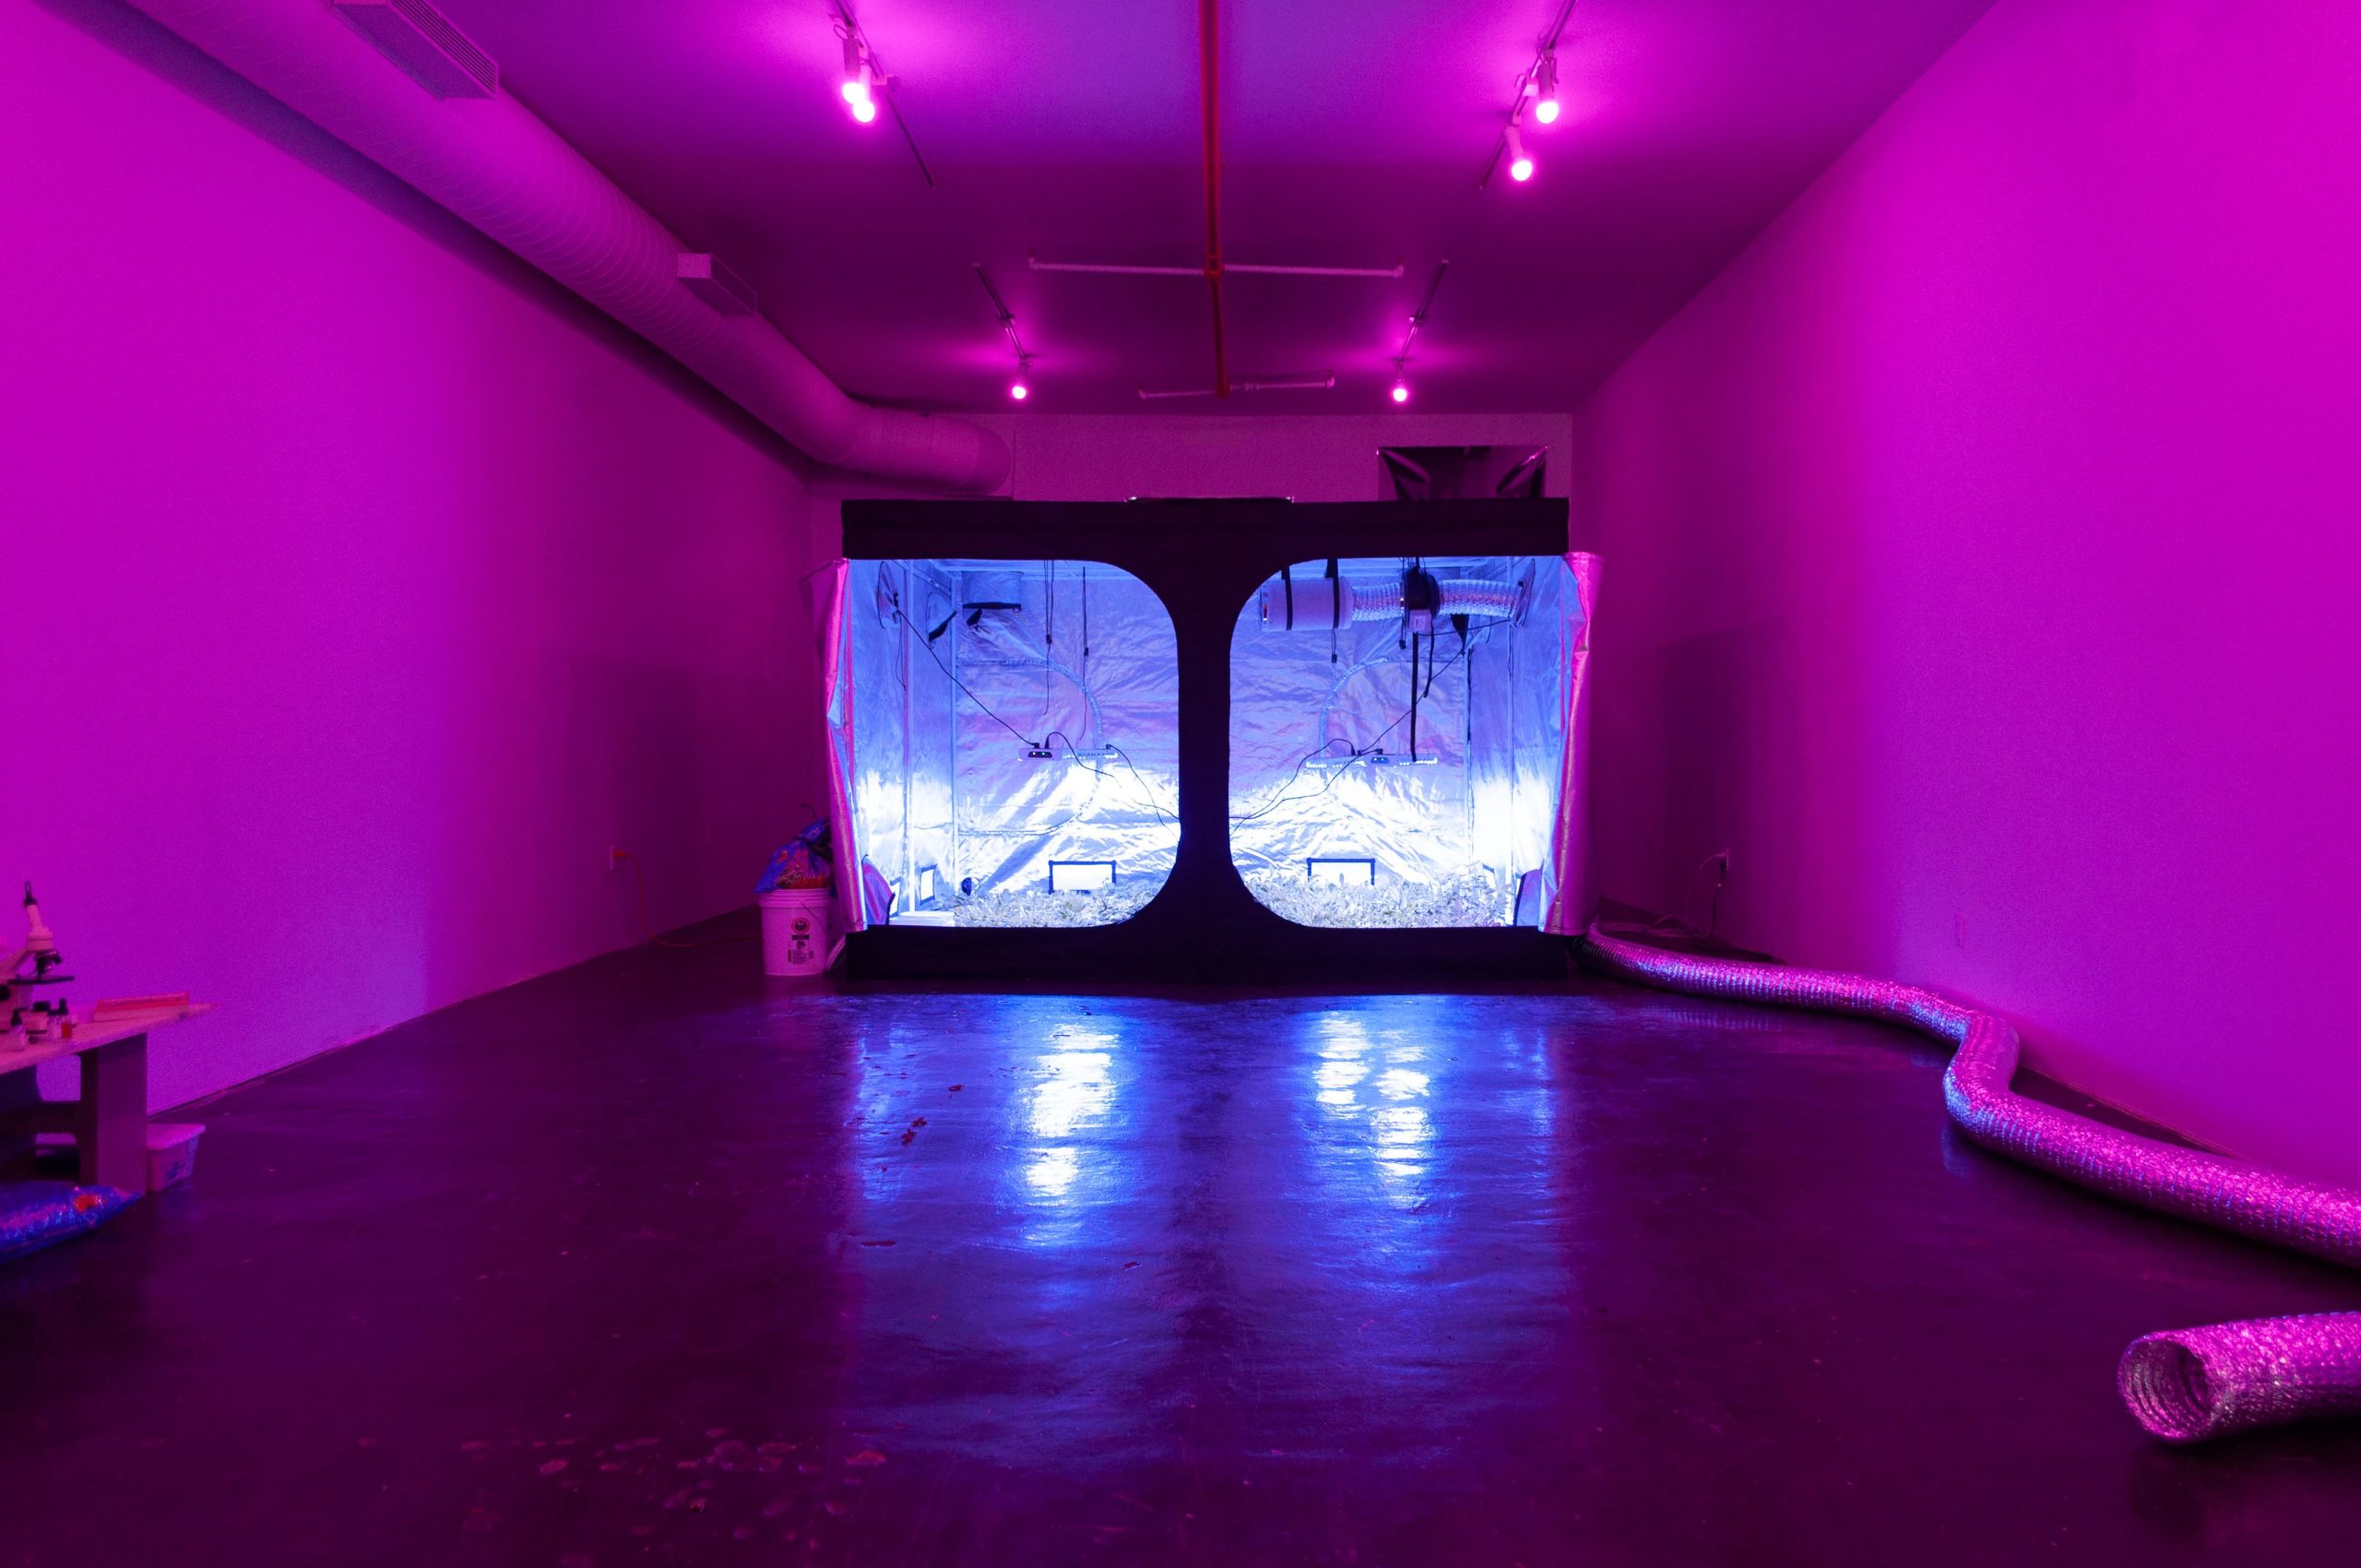 Large room with purple light with a long cylindrical tube across the floor and a tent in the far background.